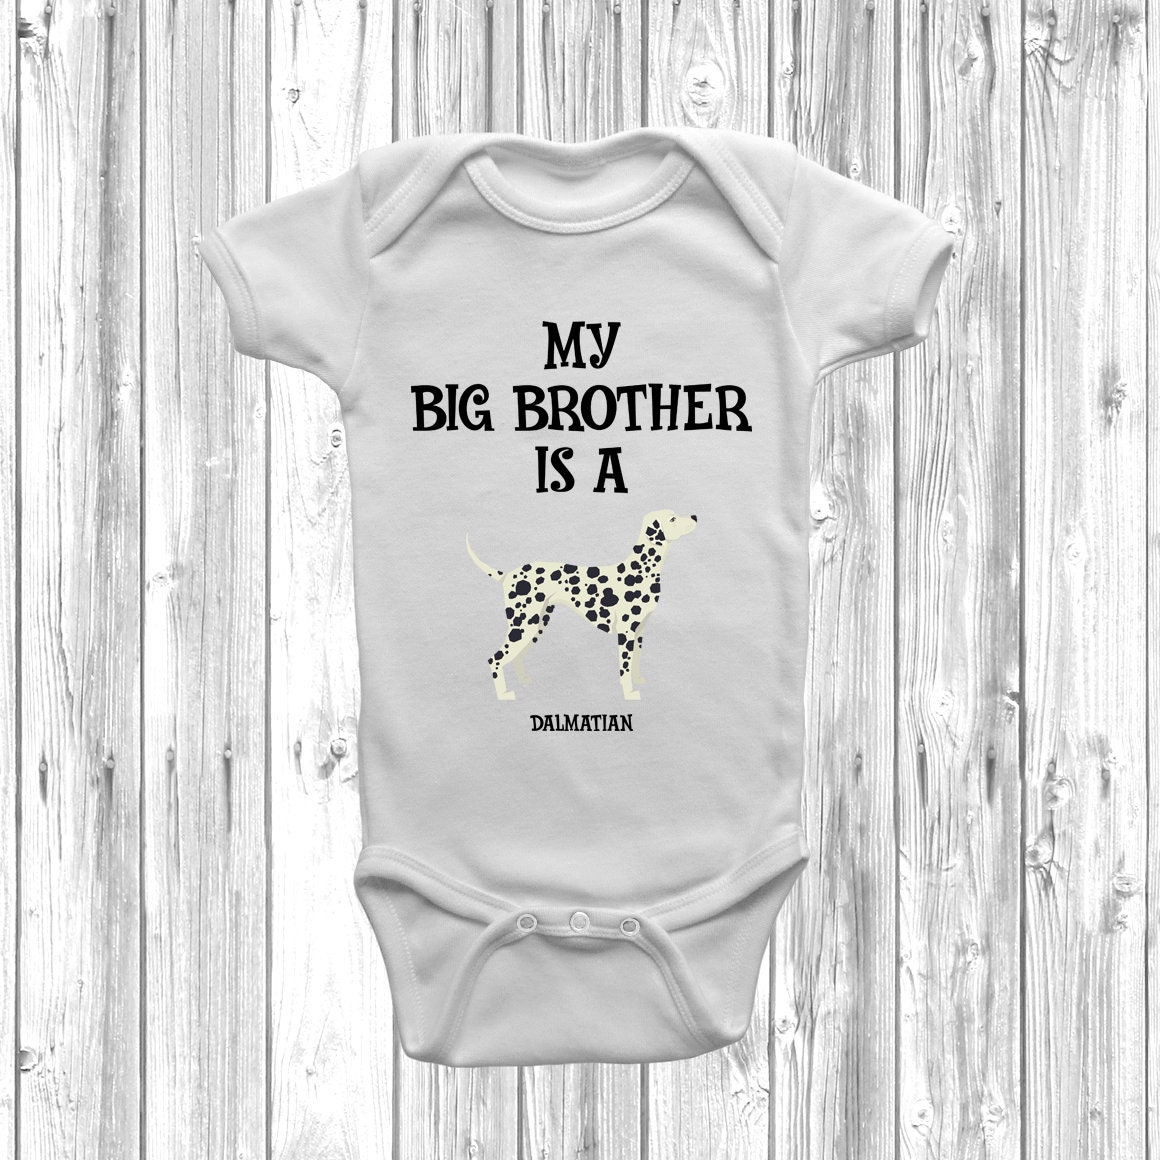 Hippowarehouse My Big Brother is a Dalmatian Baby Romper All in one Piece Unisex 